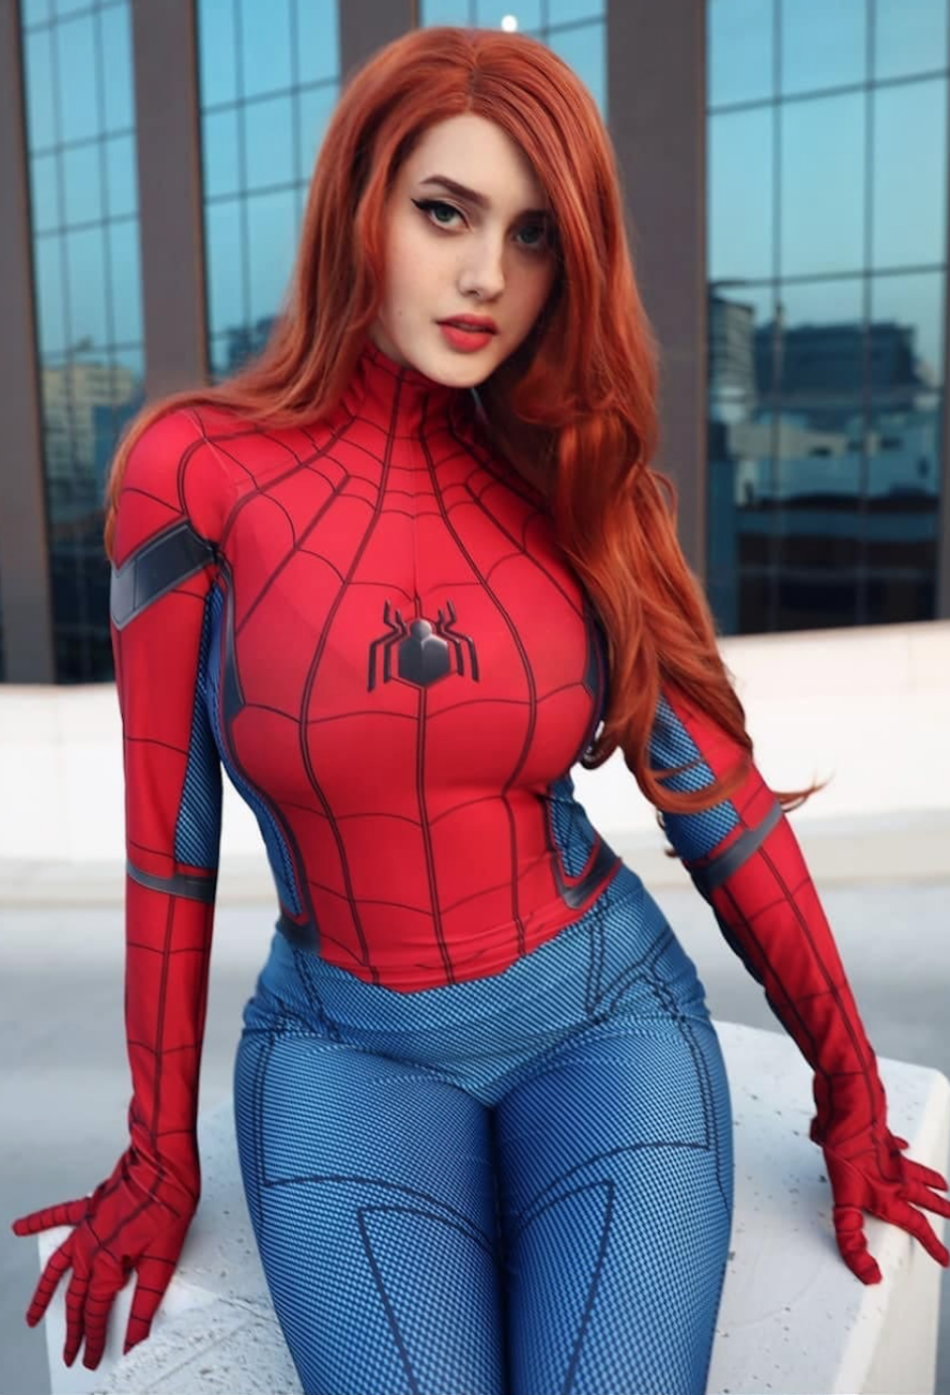 Sexy Red Hot Cosplay Girls Spiderman Women Best Photo Compilation 2021 (89 HQ Photos) 166